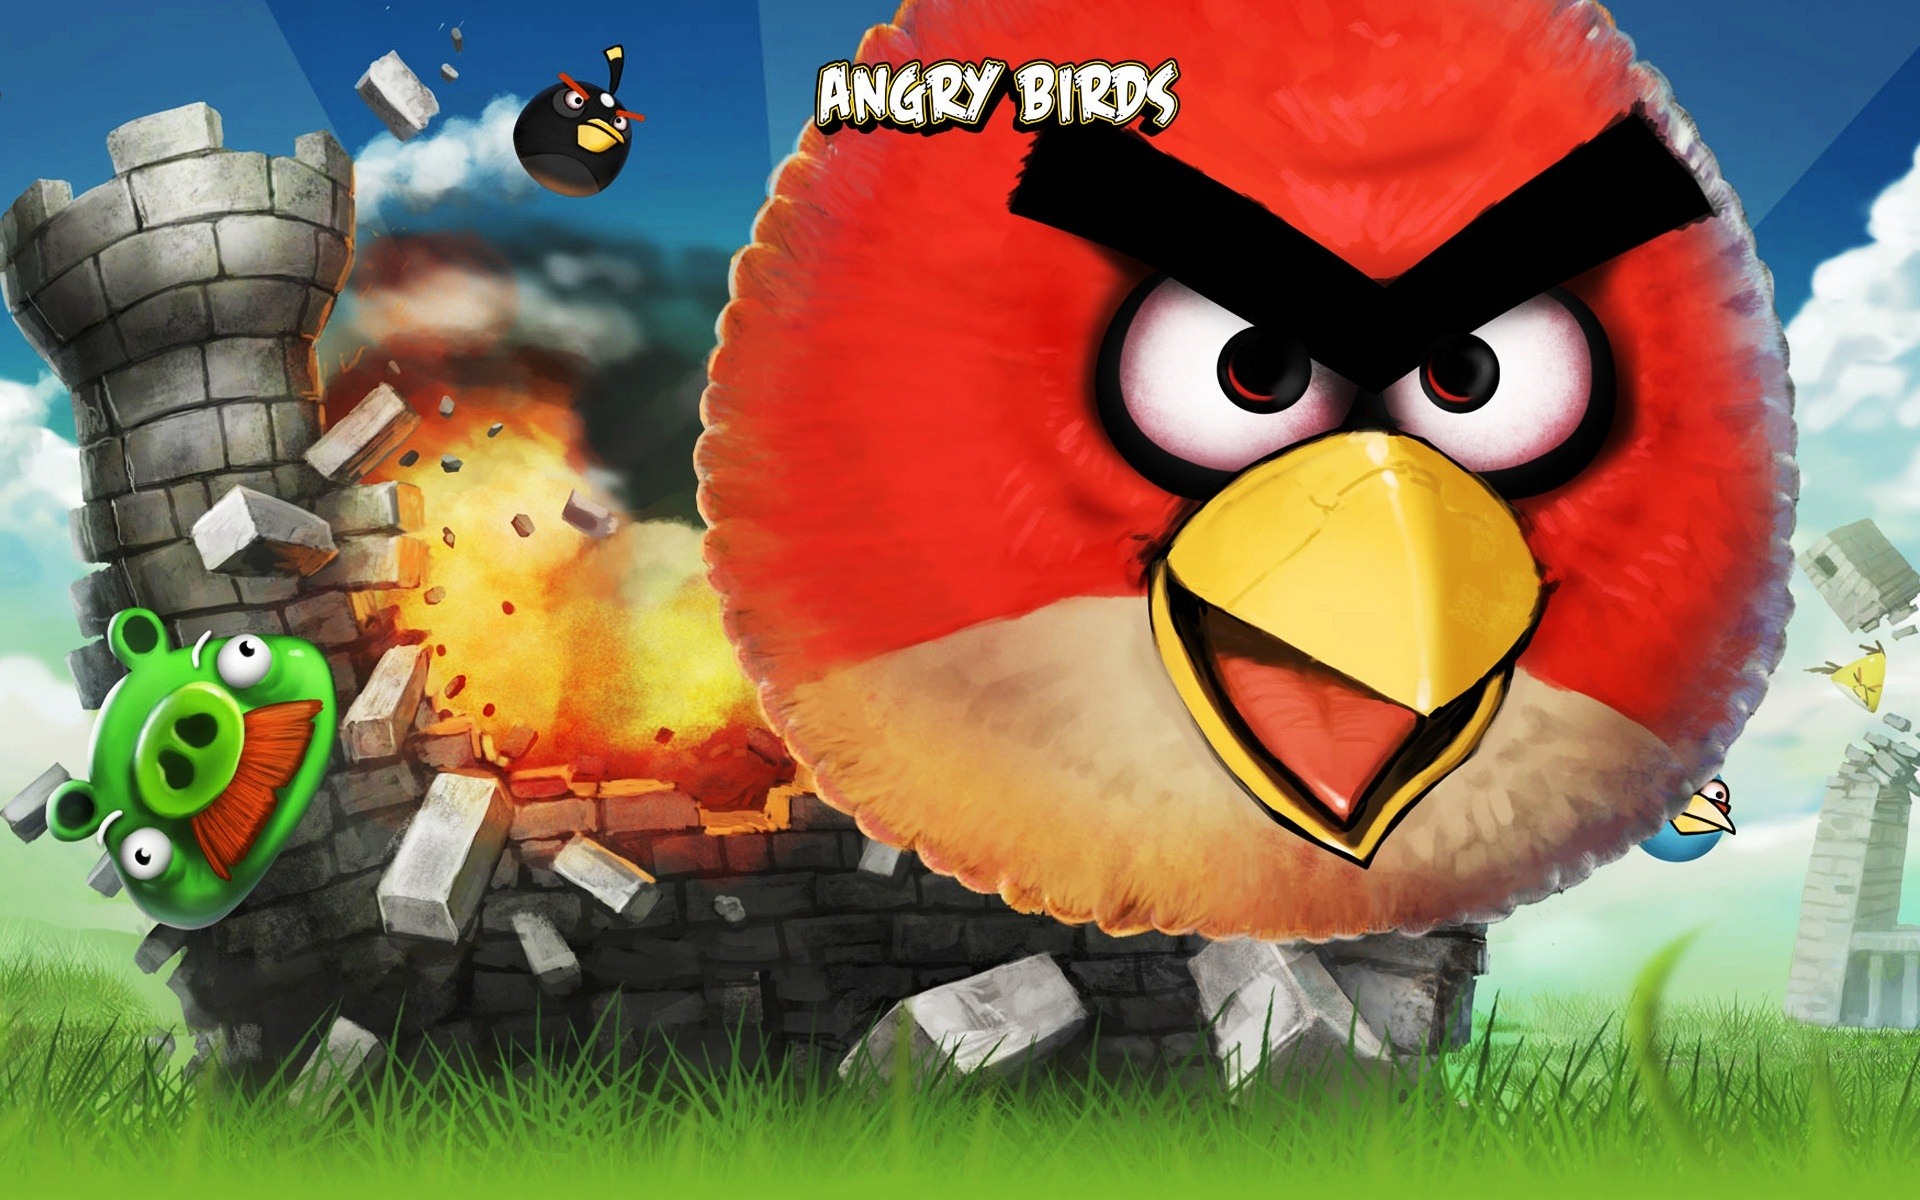 Angry Birds Game Wallpapers #7 - 1920x1200